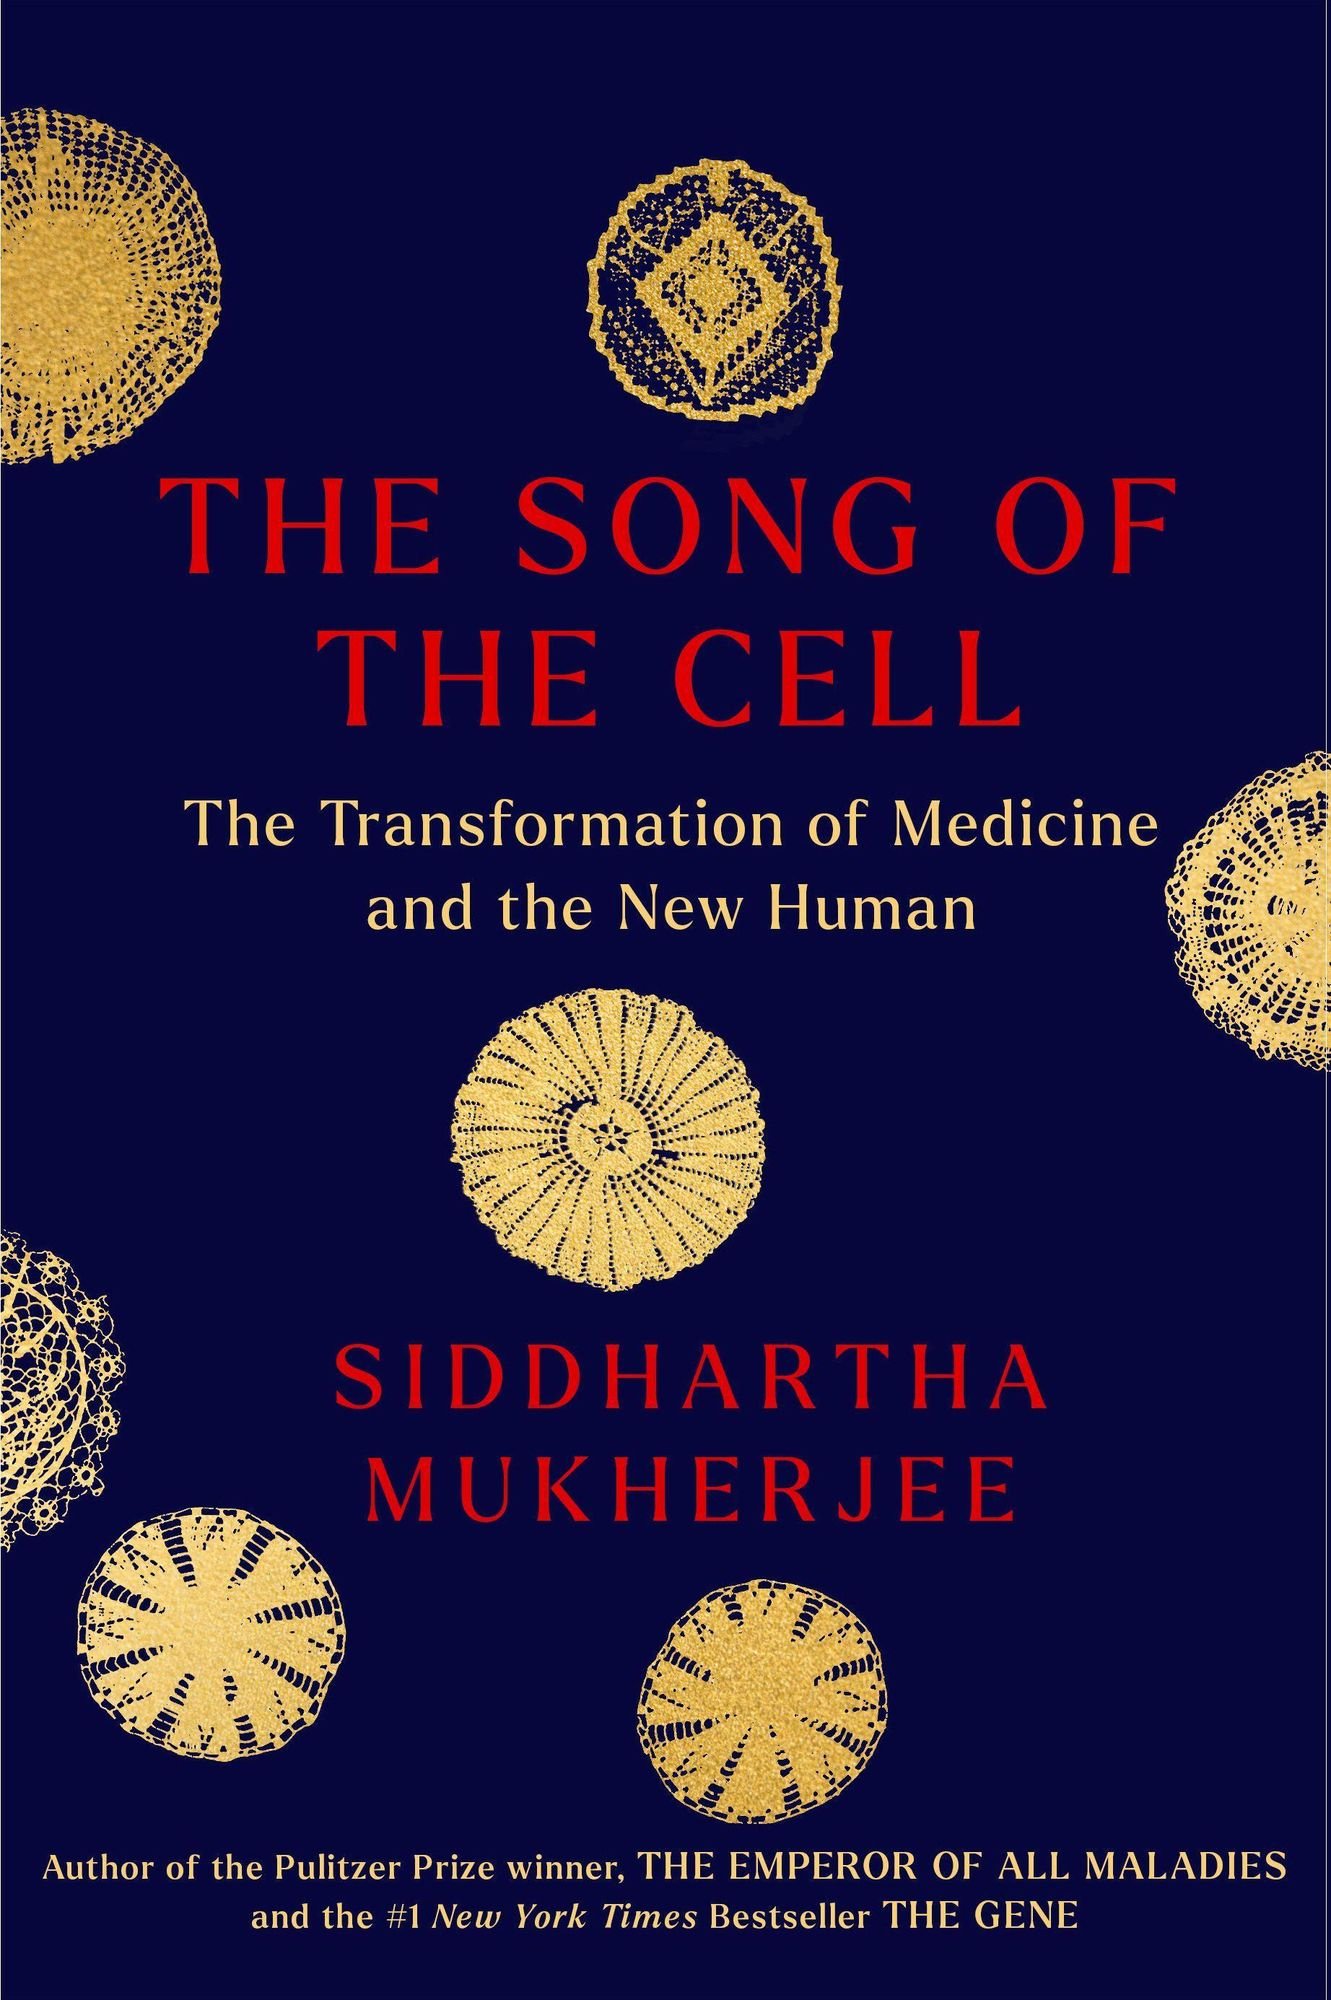 Siddhartha Mukherjee: The Song of the Cell (EBook, 2022, Scribner)